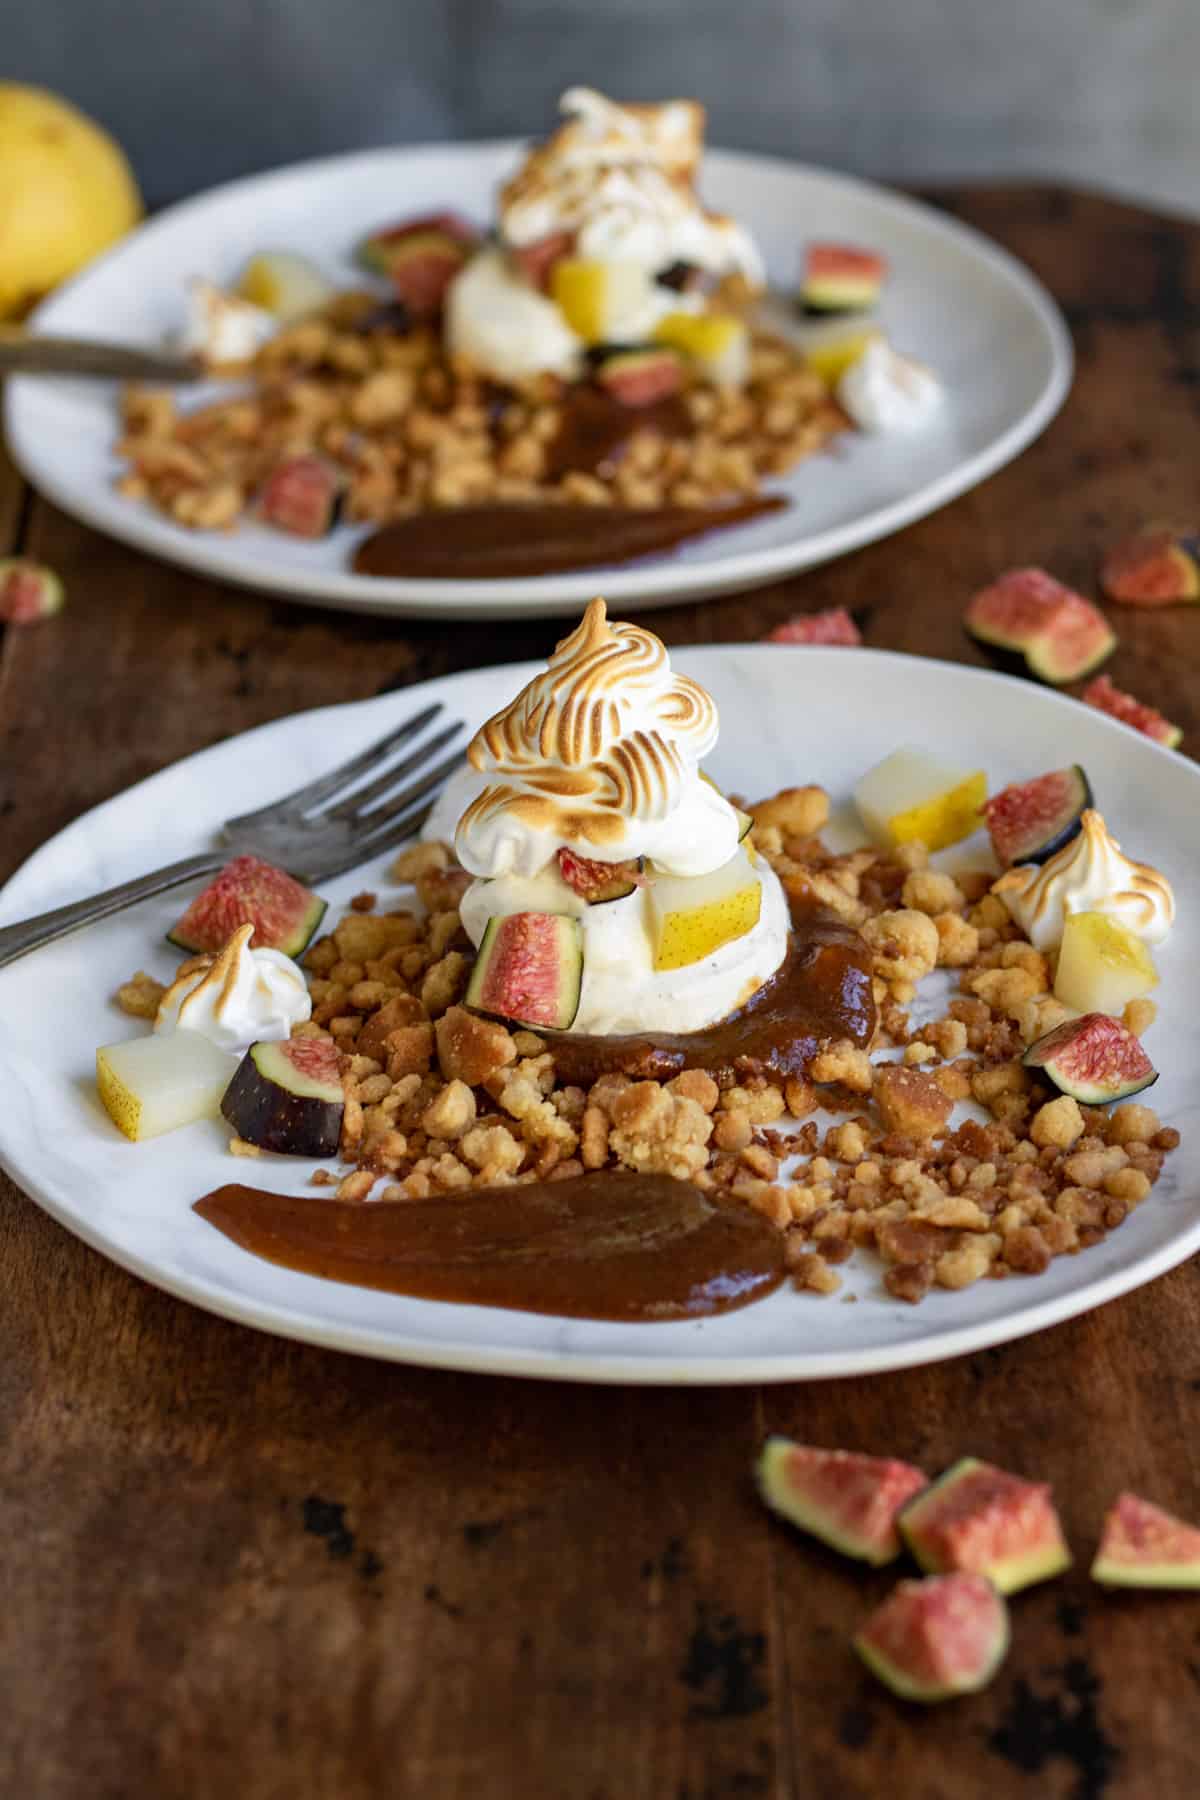 Crumble, cream, coulis, figs, pears and meringue all piled on a plate.